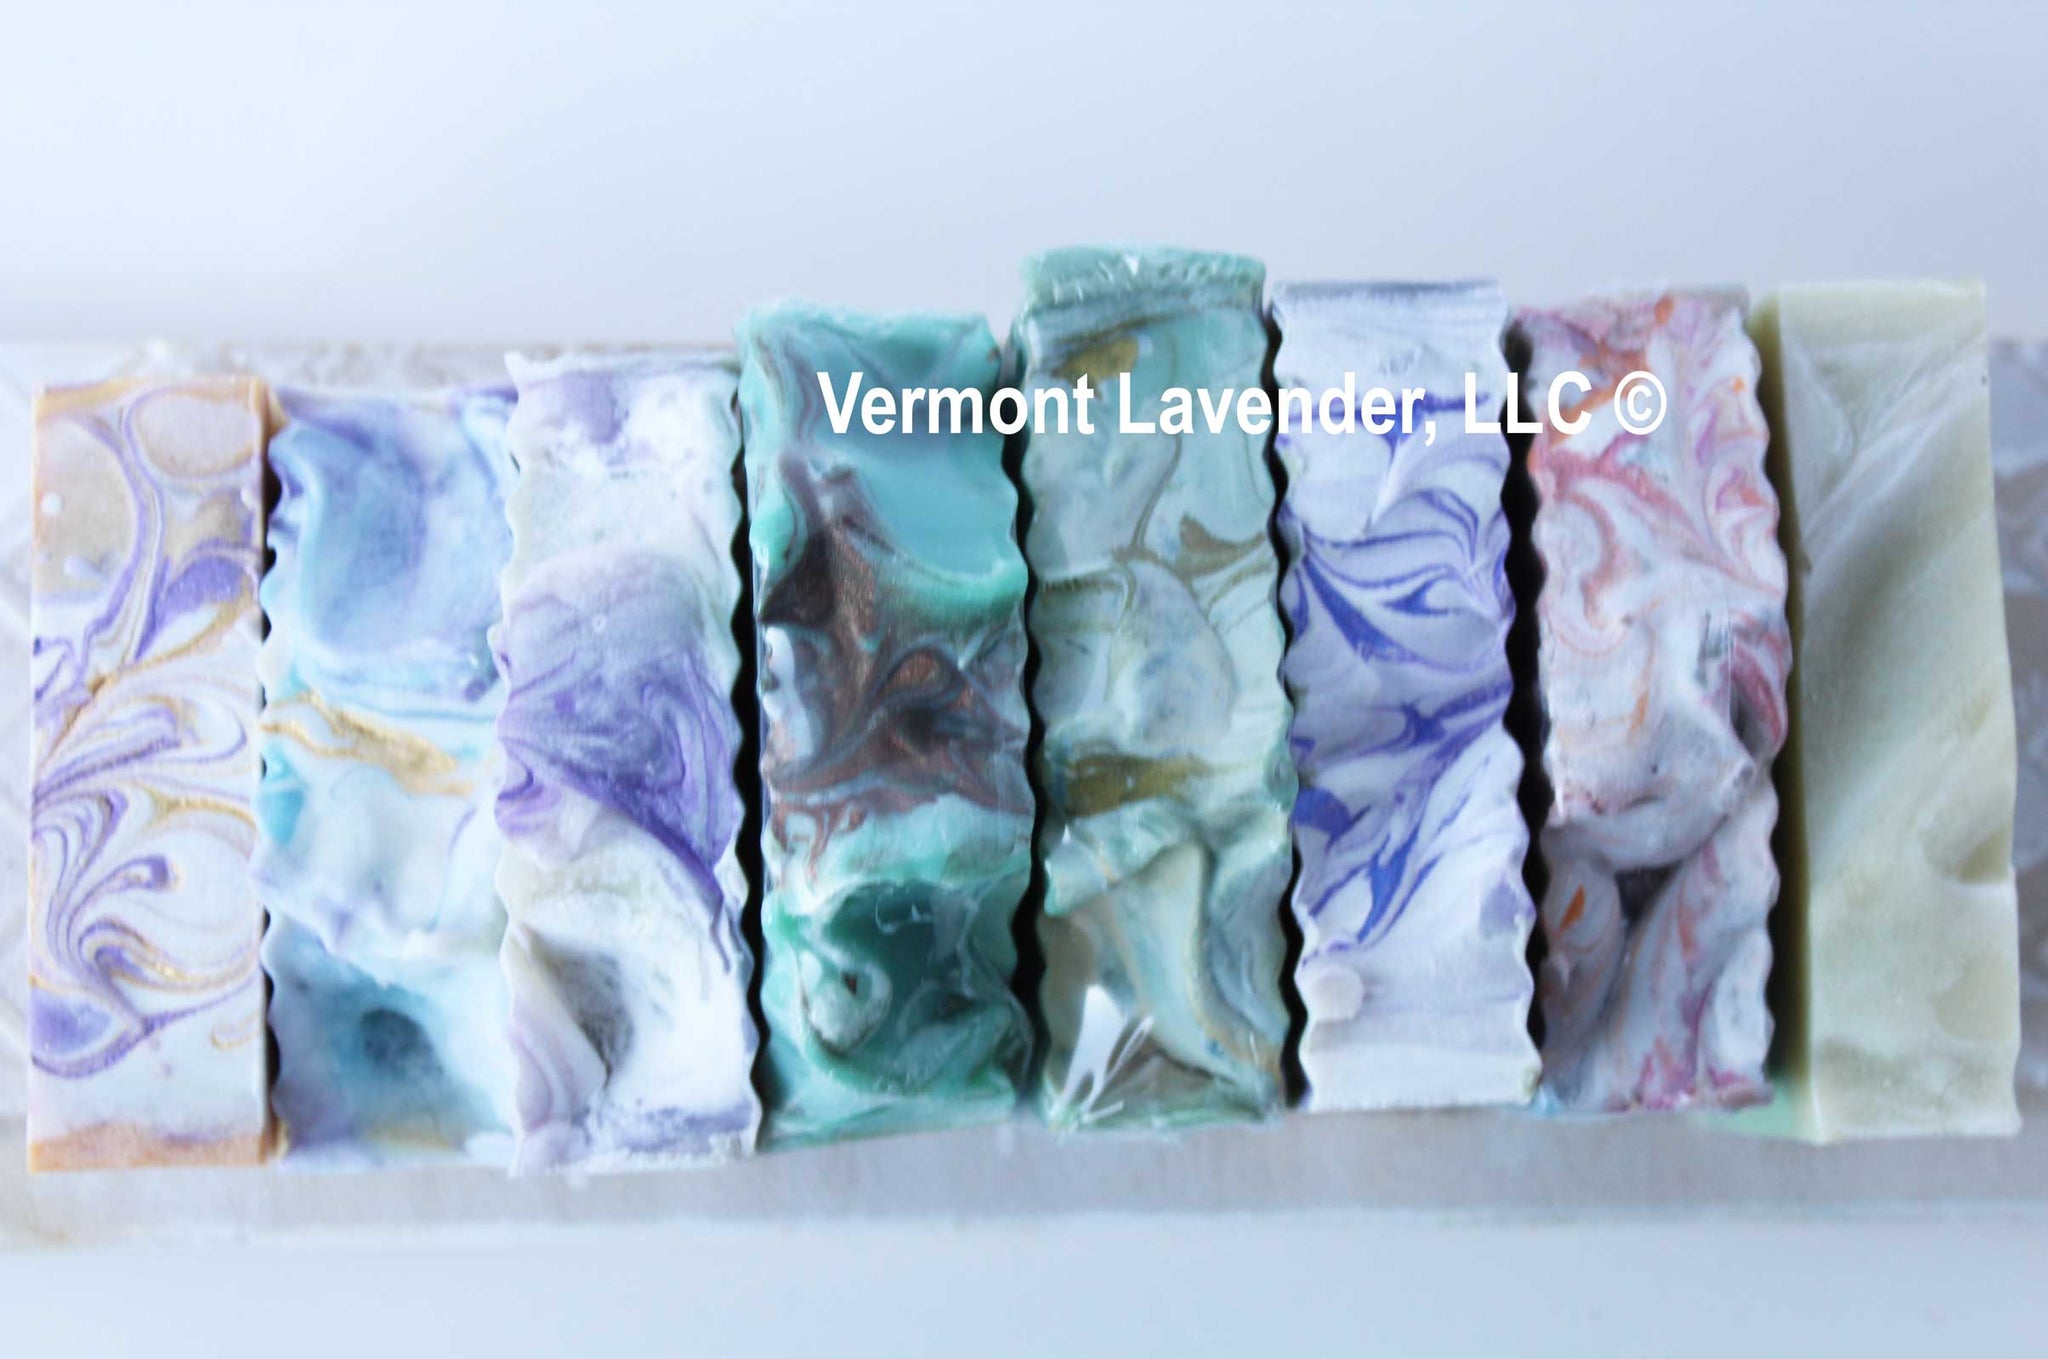 A collection of handmade soaps by Vermont Lavender